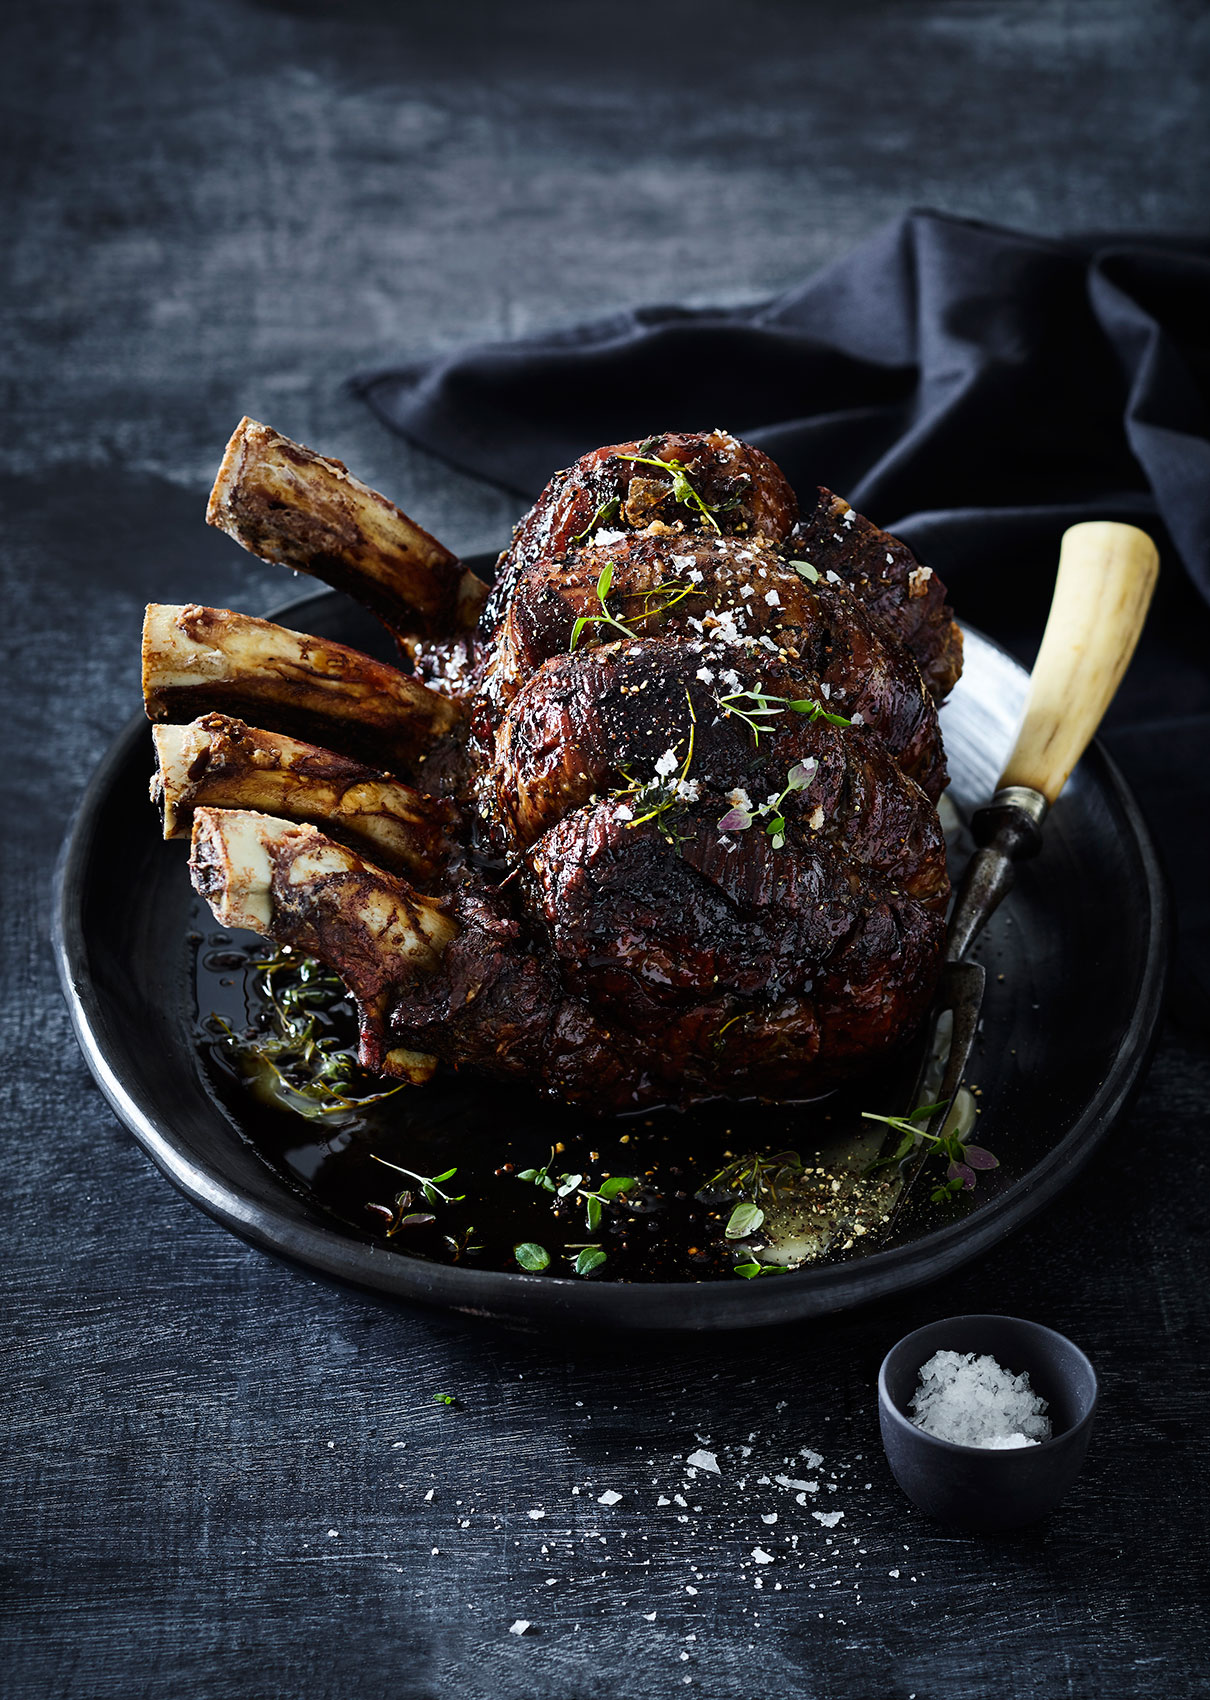 Slow Cooked • Standing Roast with Fresh Herbs & Rock Salt in Dark Dish • Cookbook & Editorial Food Photography